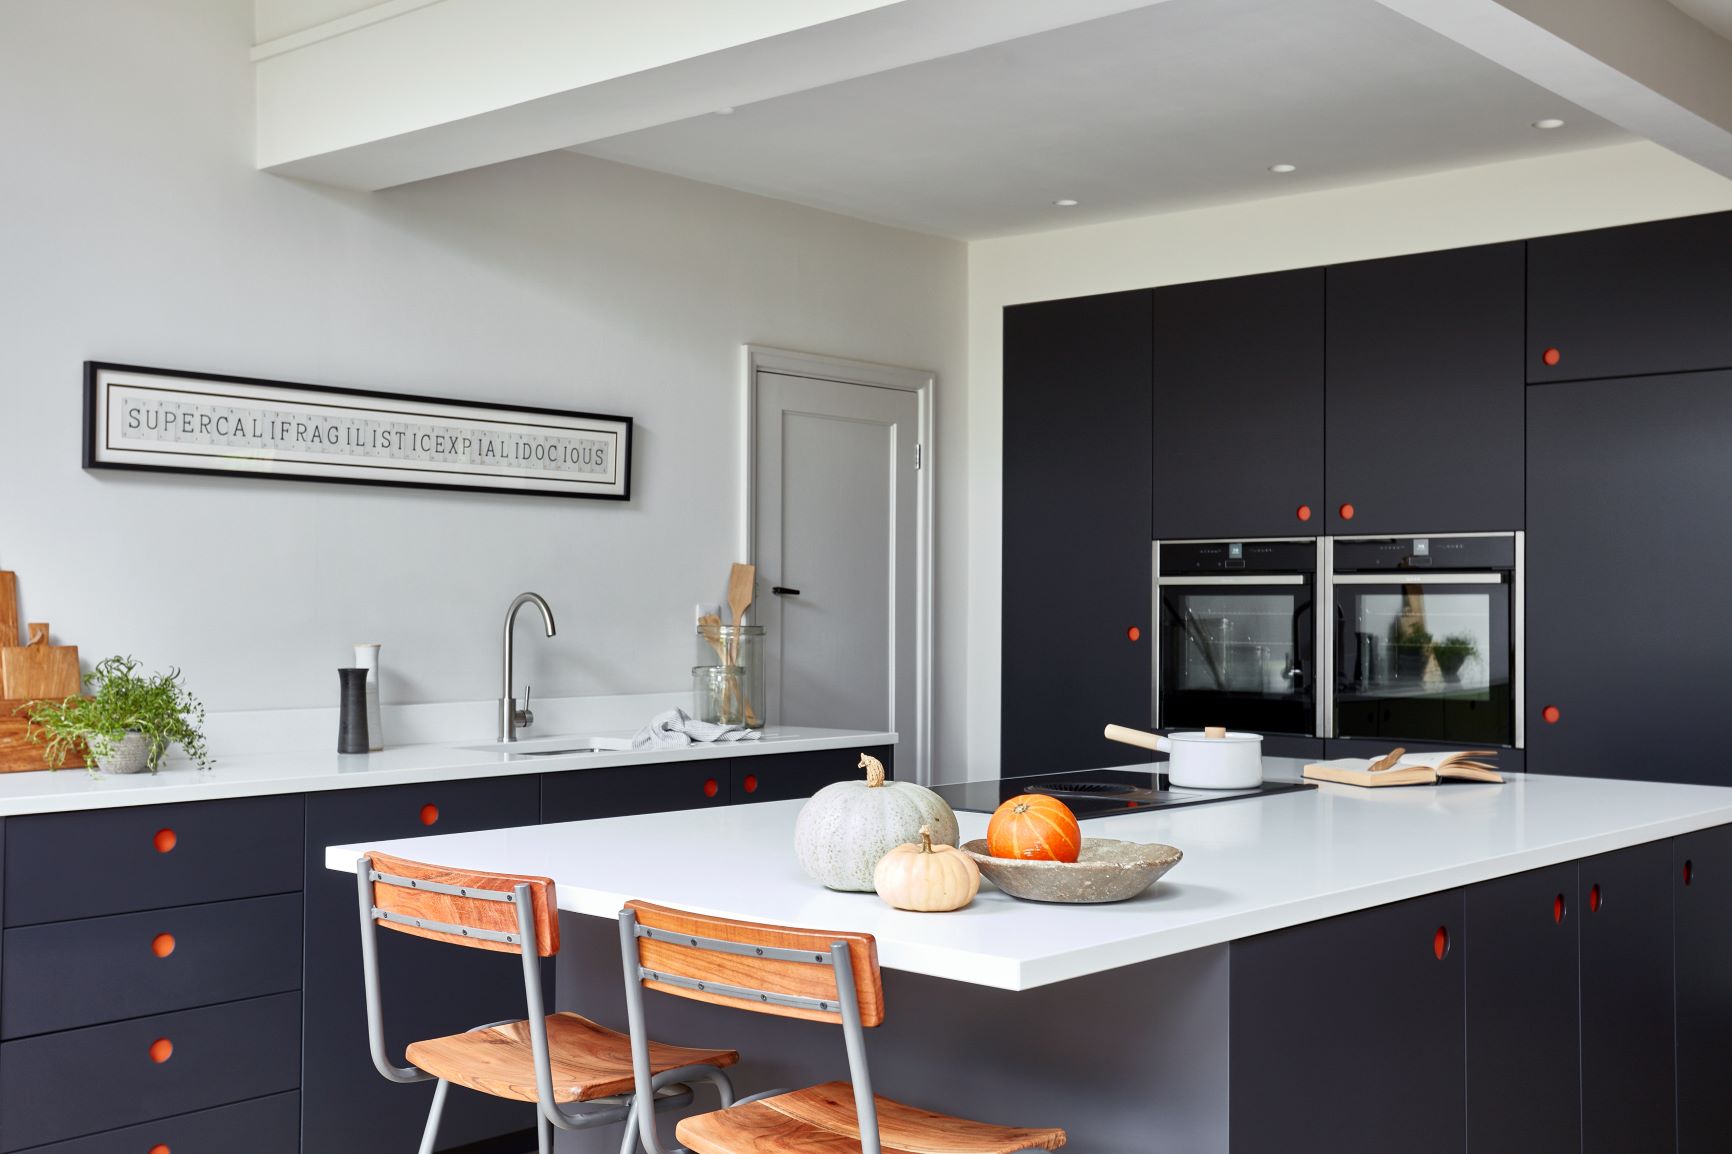 The Clarence kitchen by Naked Kitchens